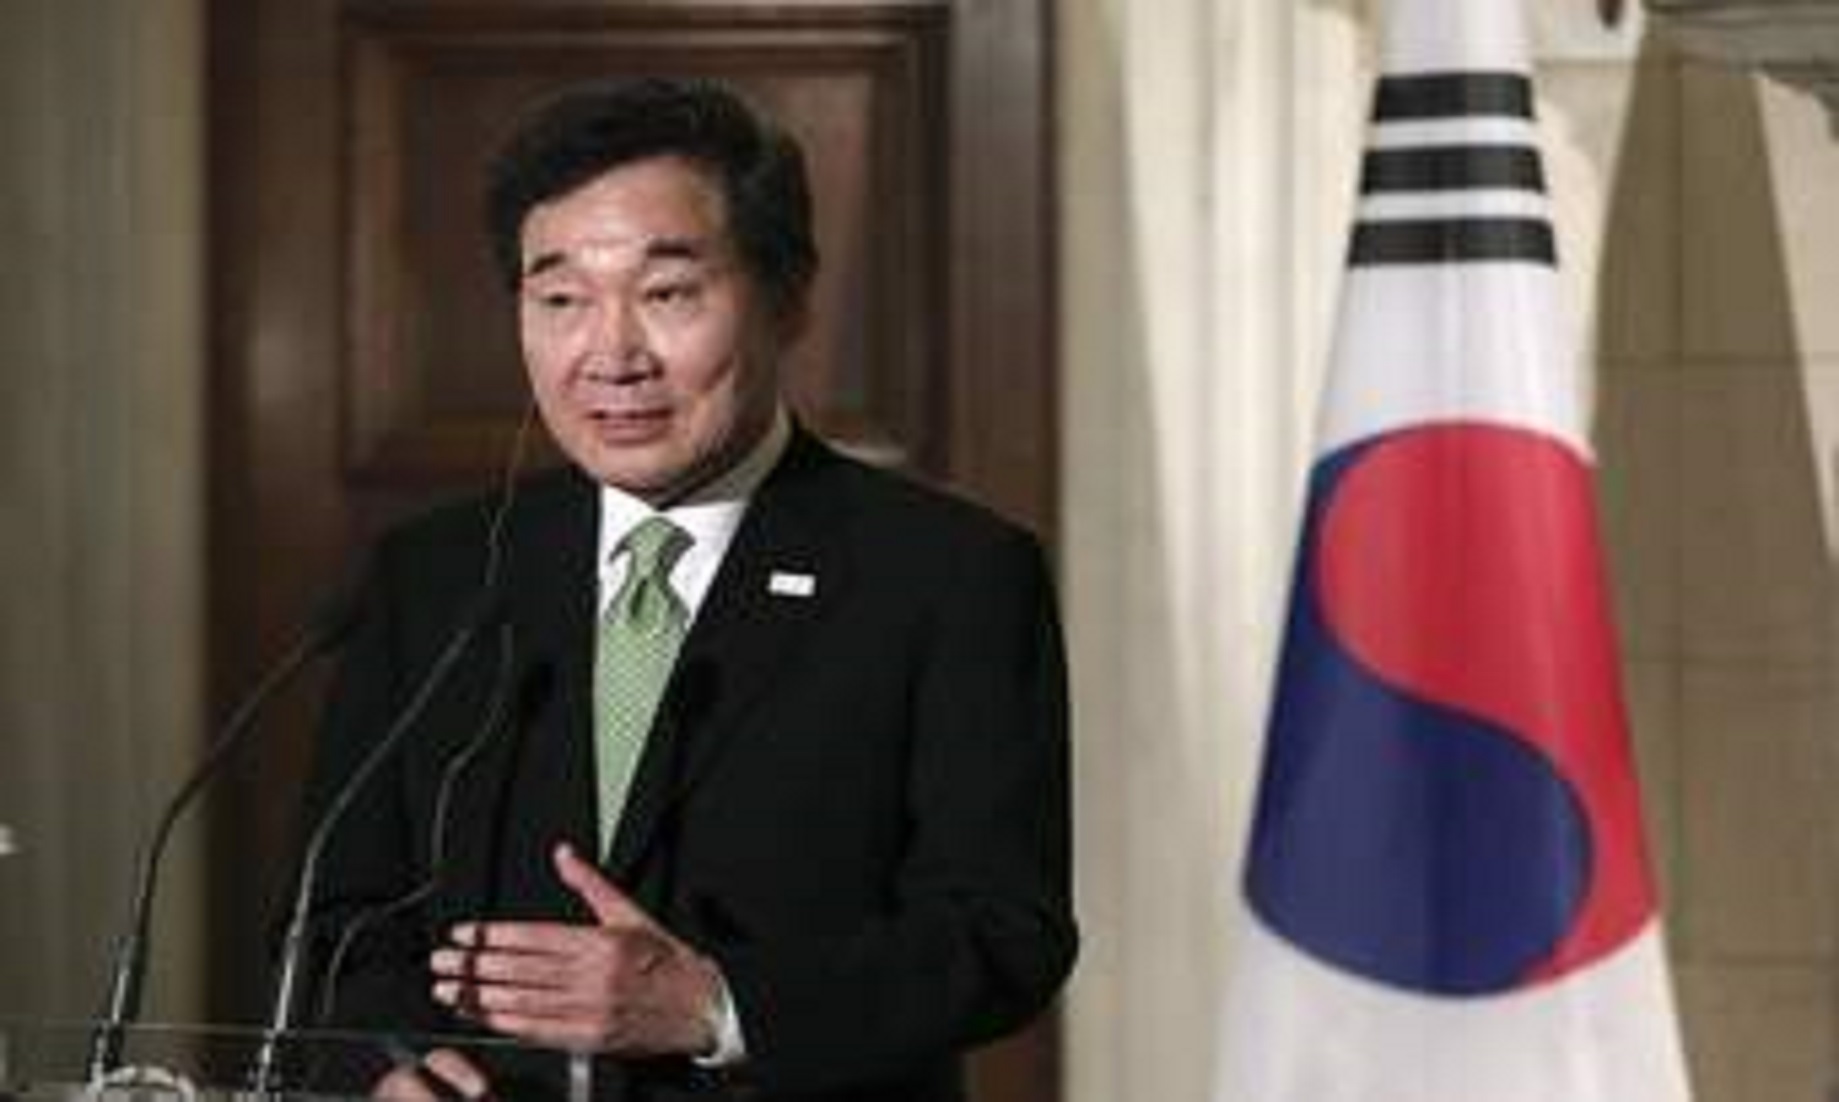 S.Korea’s Ruling Party Chief Calls On Japan To Find Middle Ground Over Historical Issues